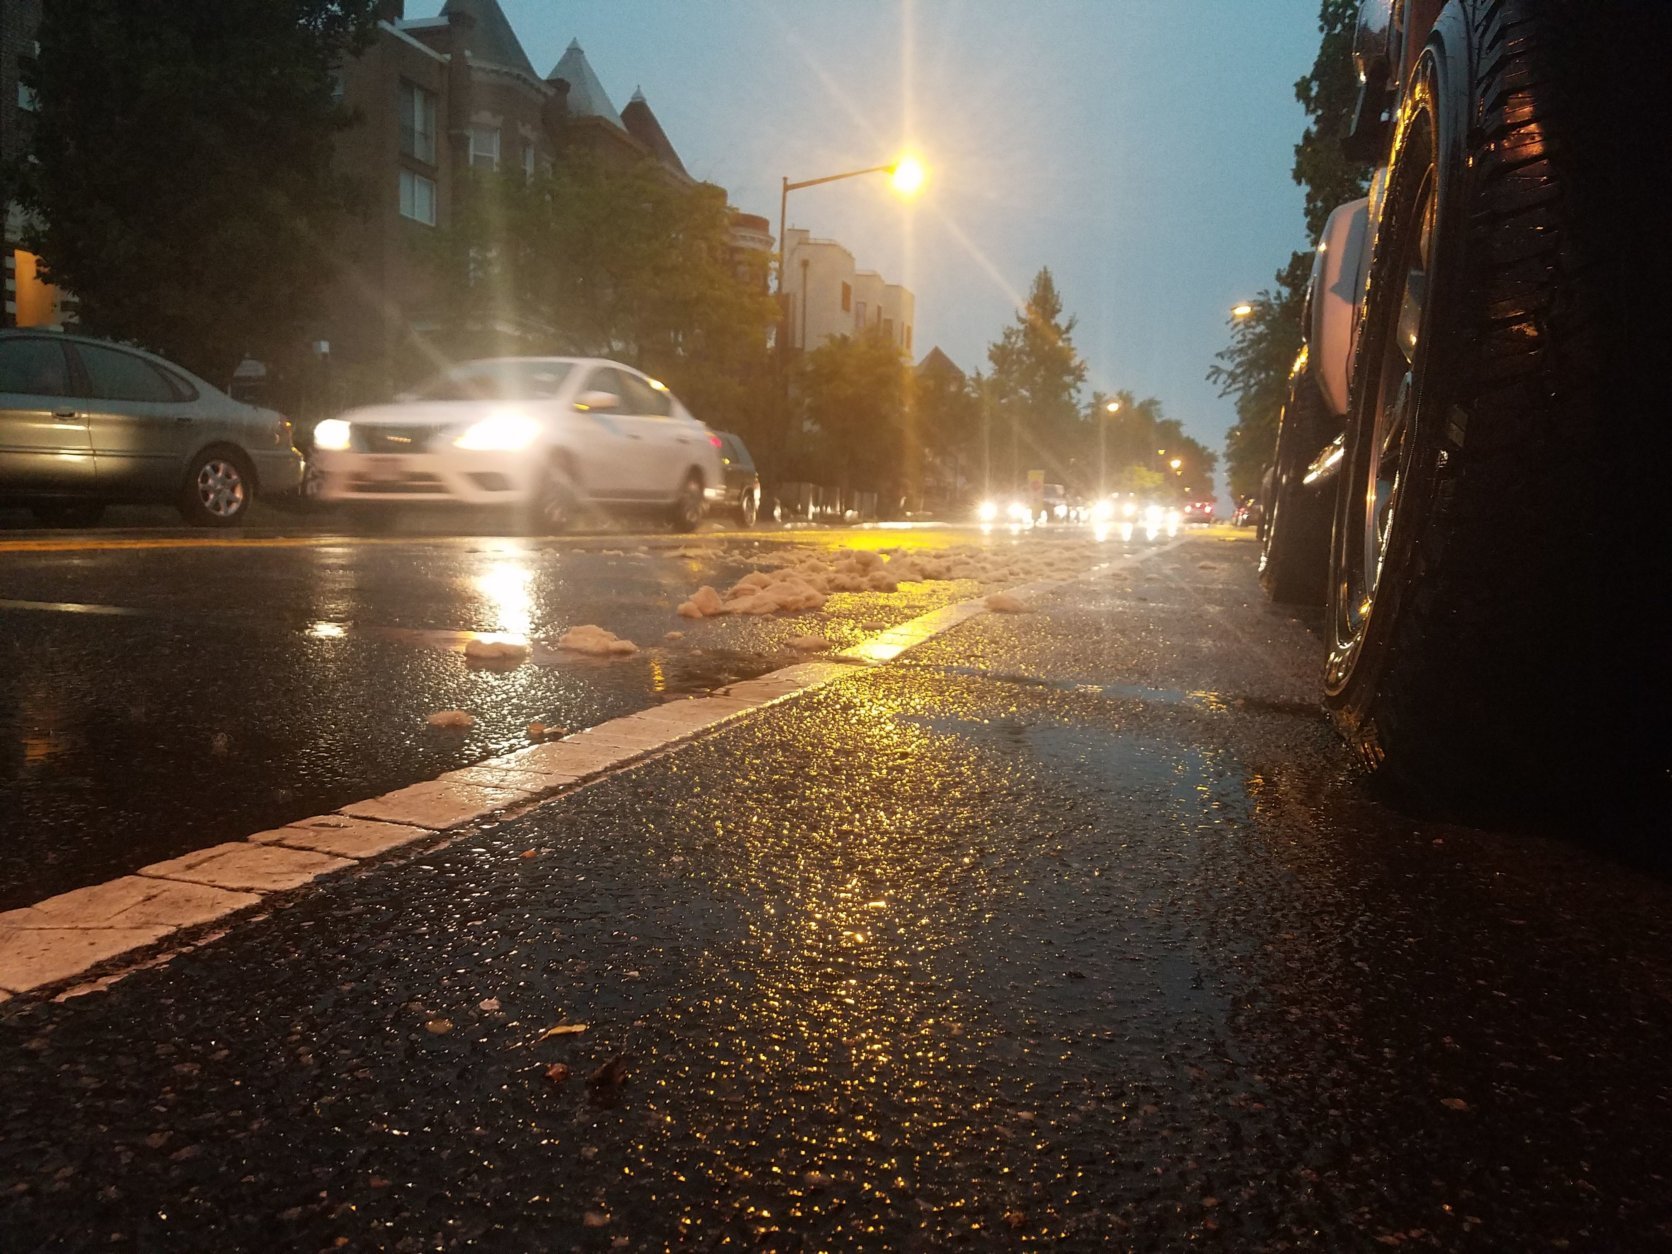 View of the wet pavement in Washington, D.C. during the Monday night storms. (WTOP/Will Vitka)